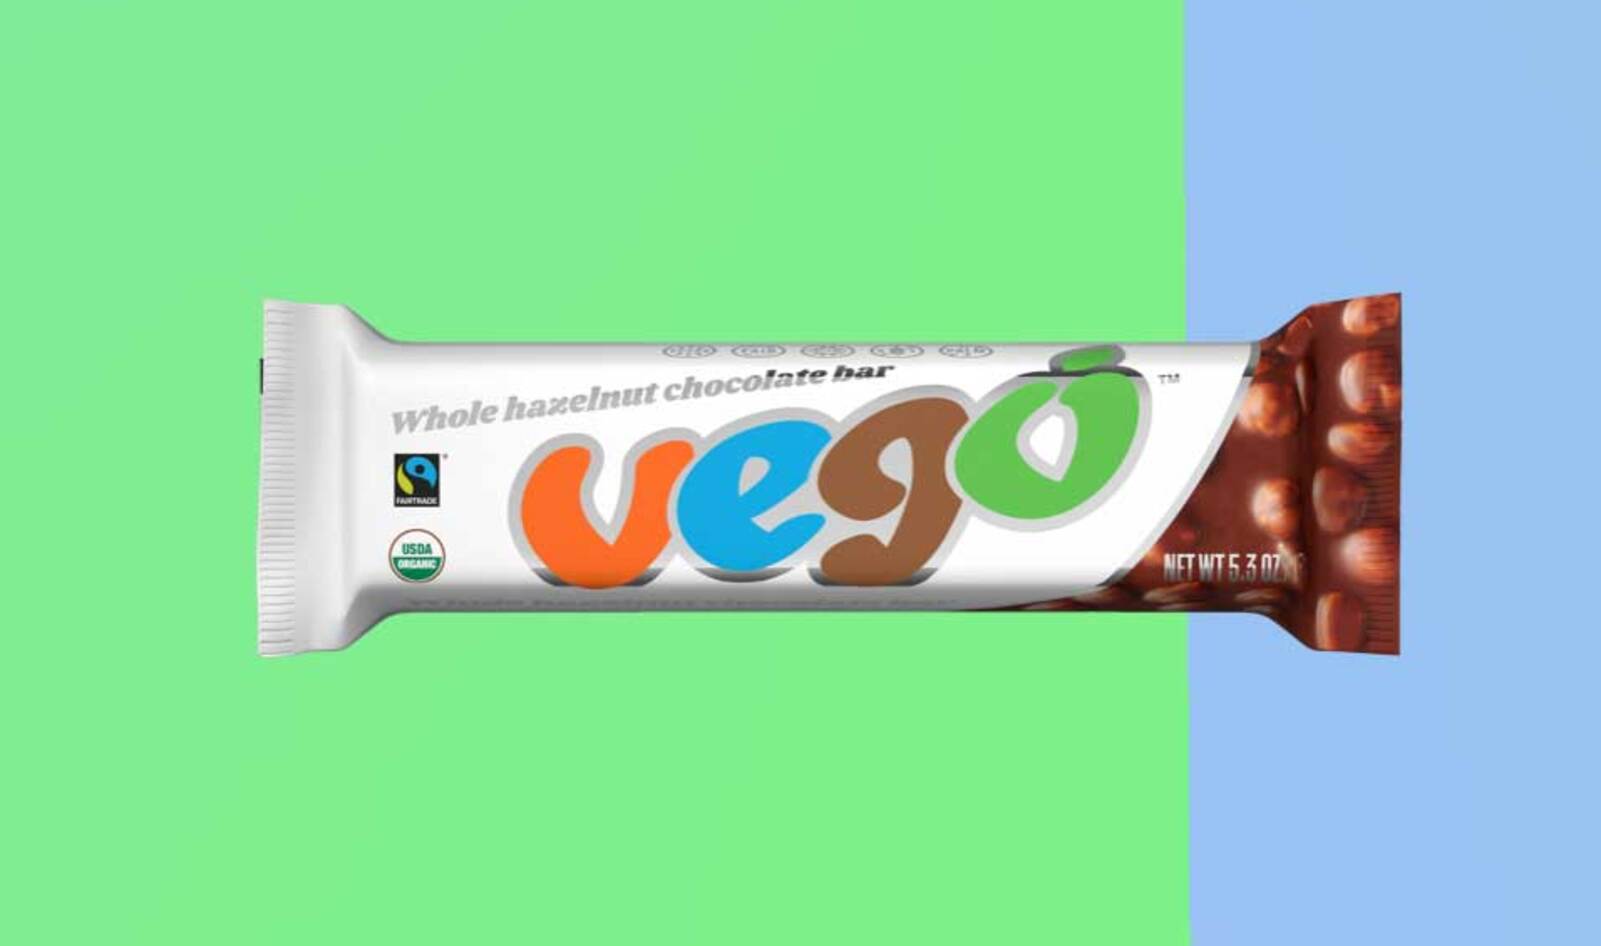 Europe’s Cult-Favorite VEGO Chocolate Bar Launches in the United States